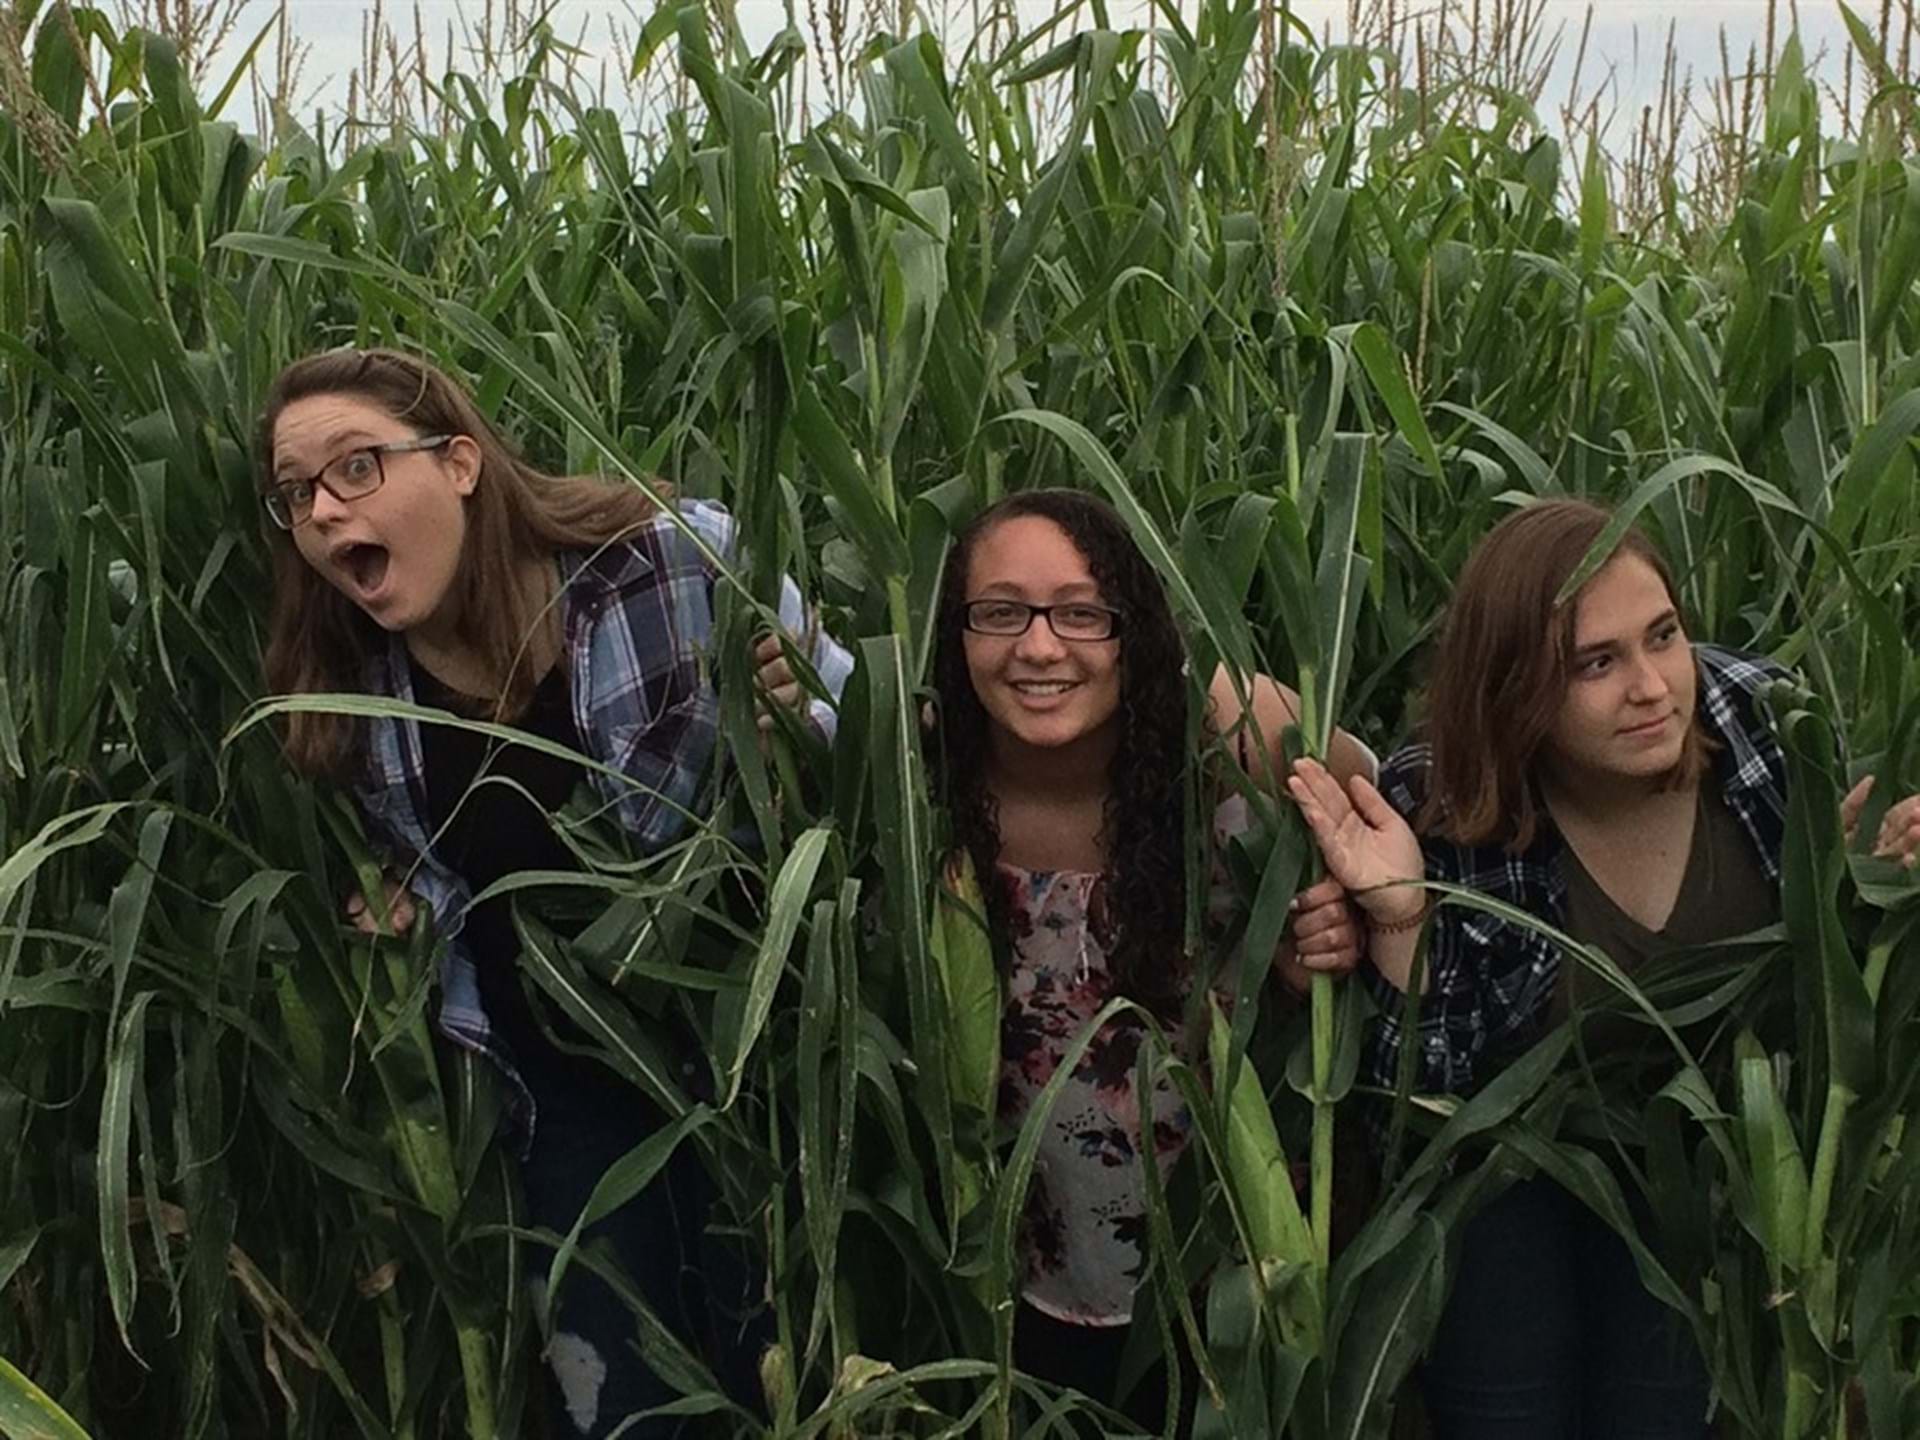 Get lost in the corn maze!